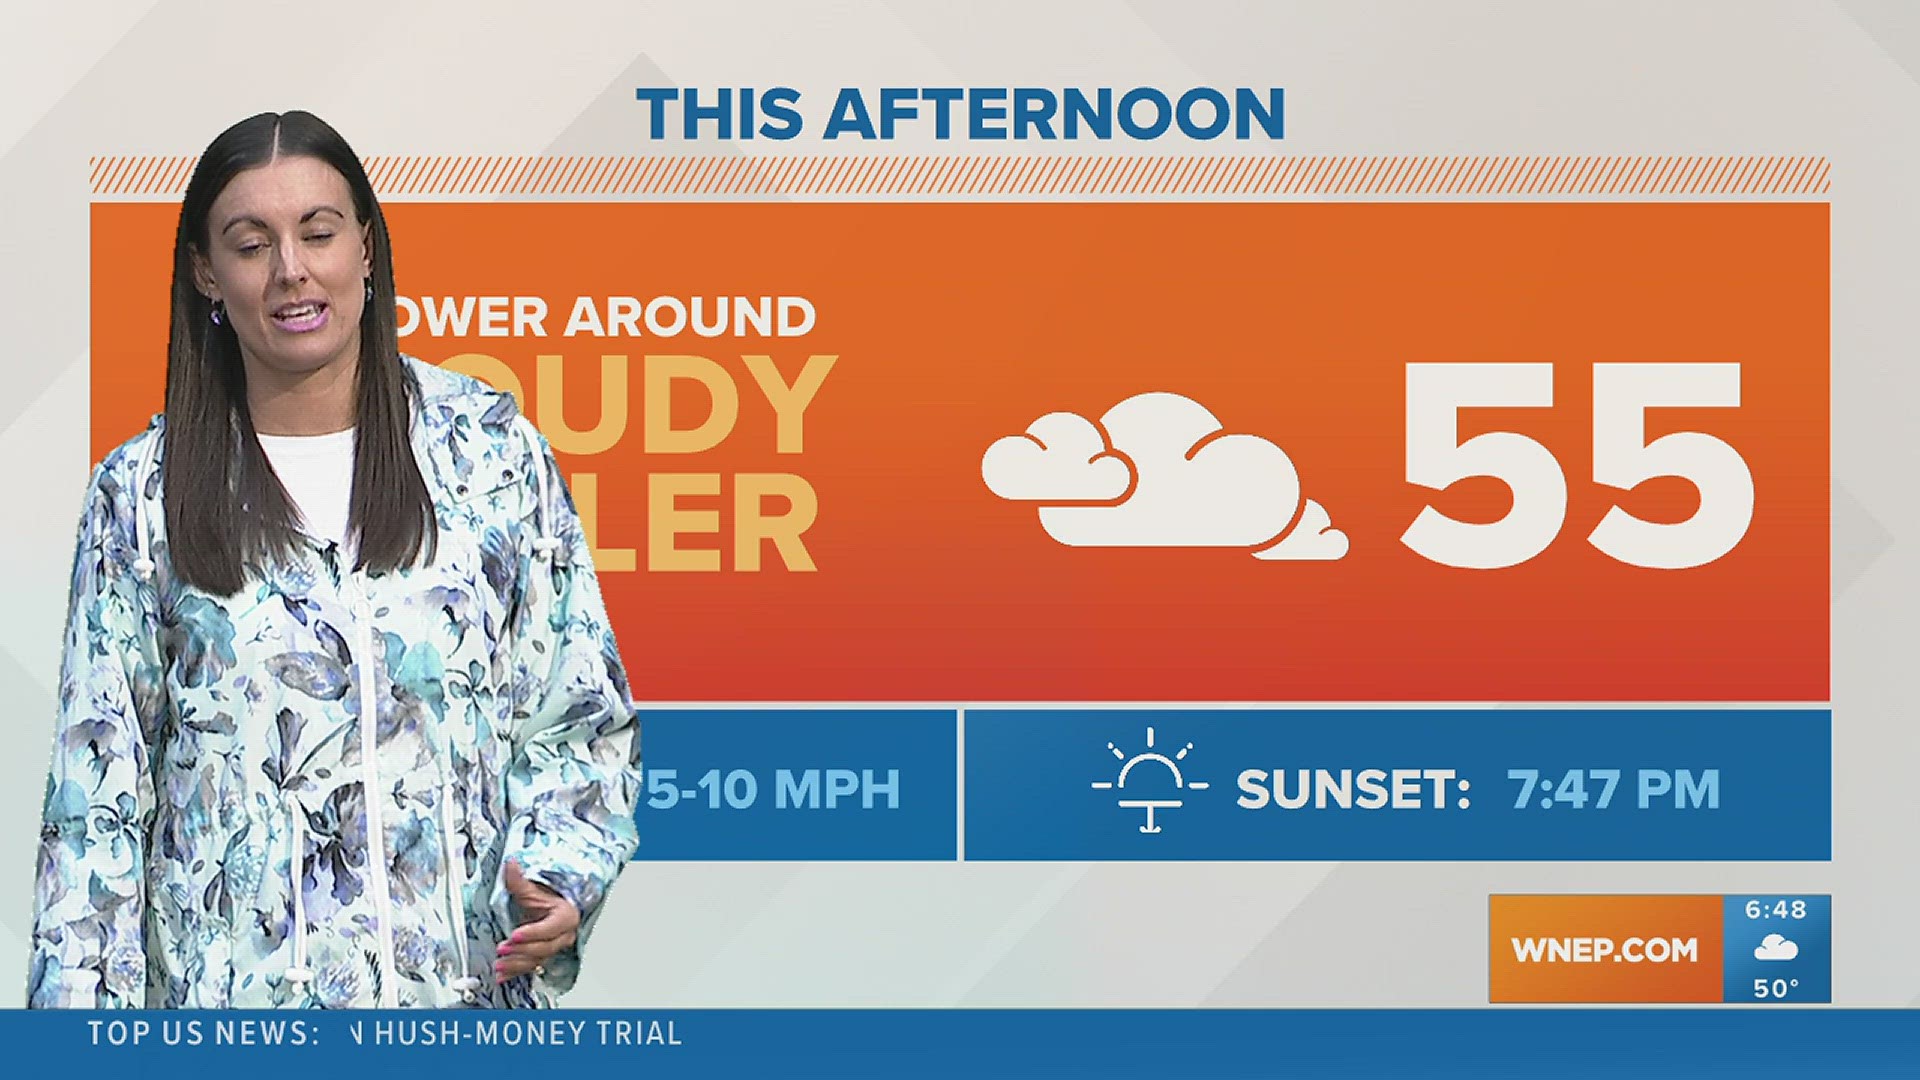 It will be cloudy and cooler today with just an isolated shower.